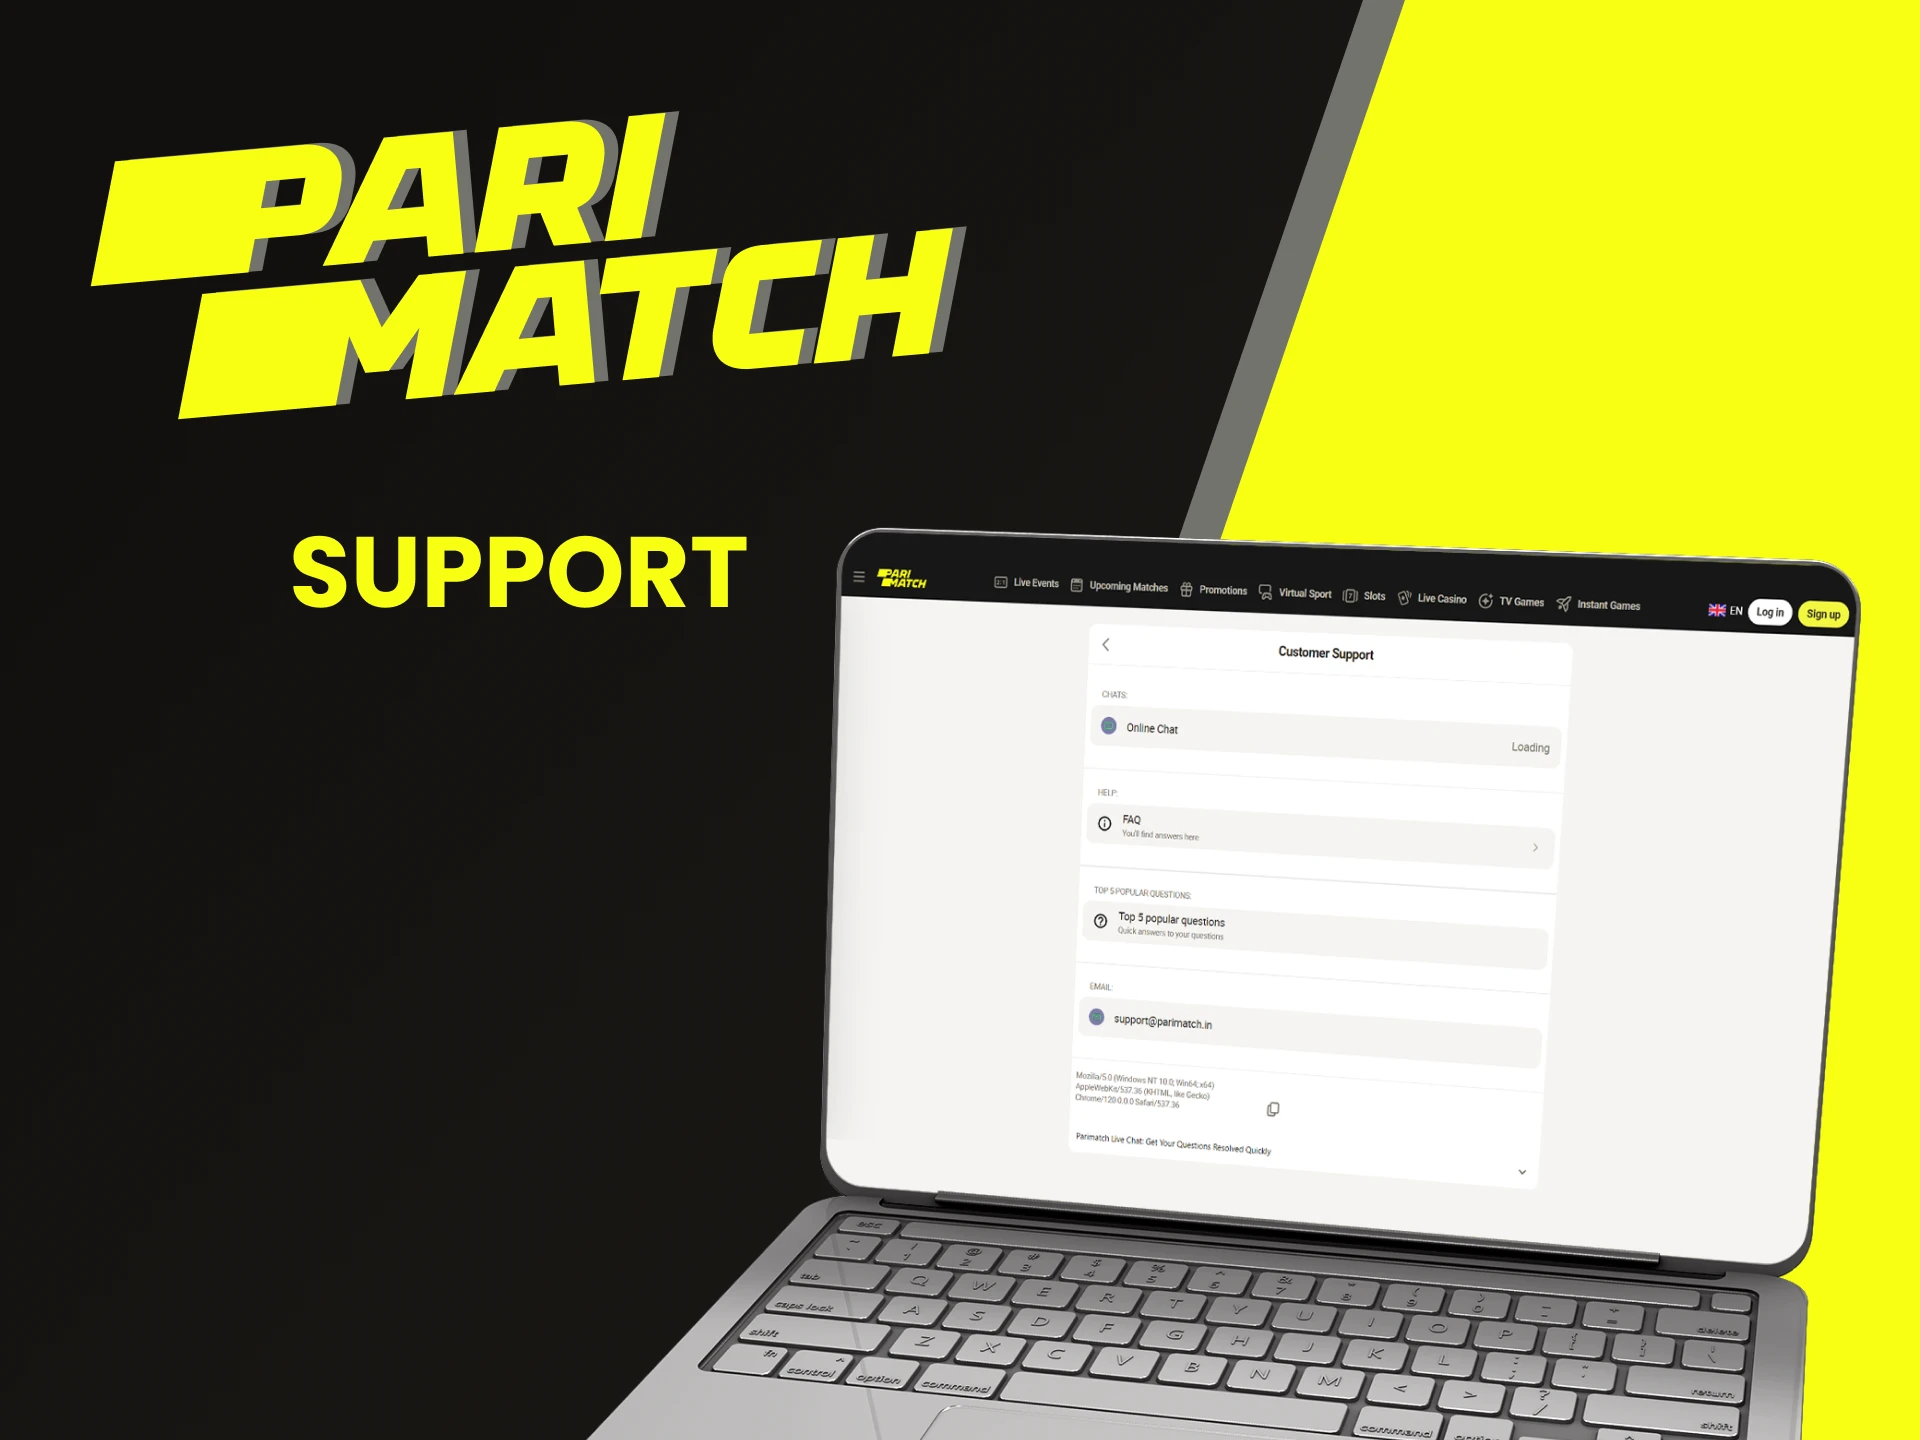 We will tell you how to contact the Parimatch team.